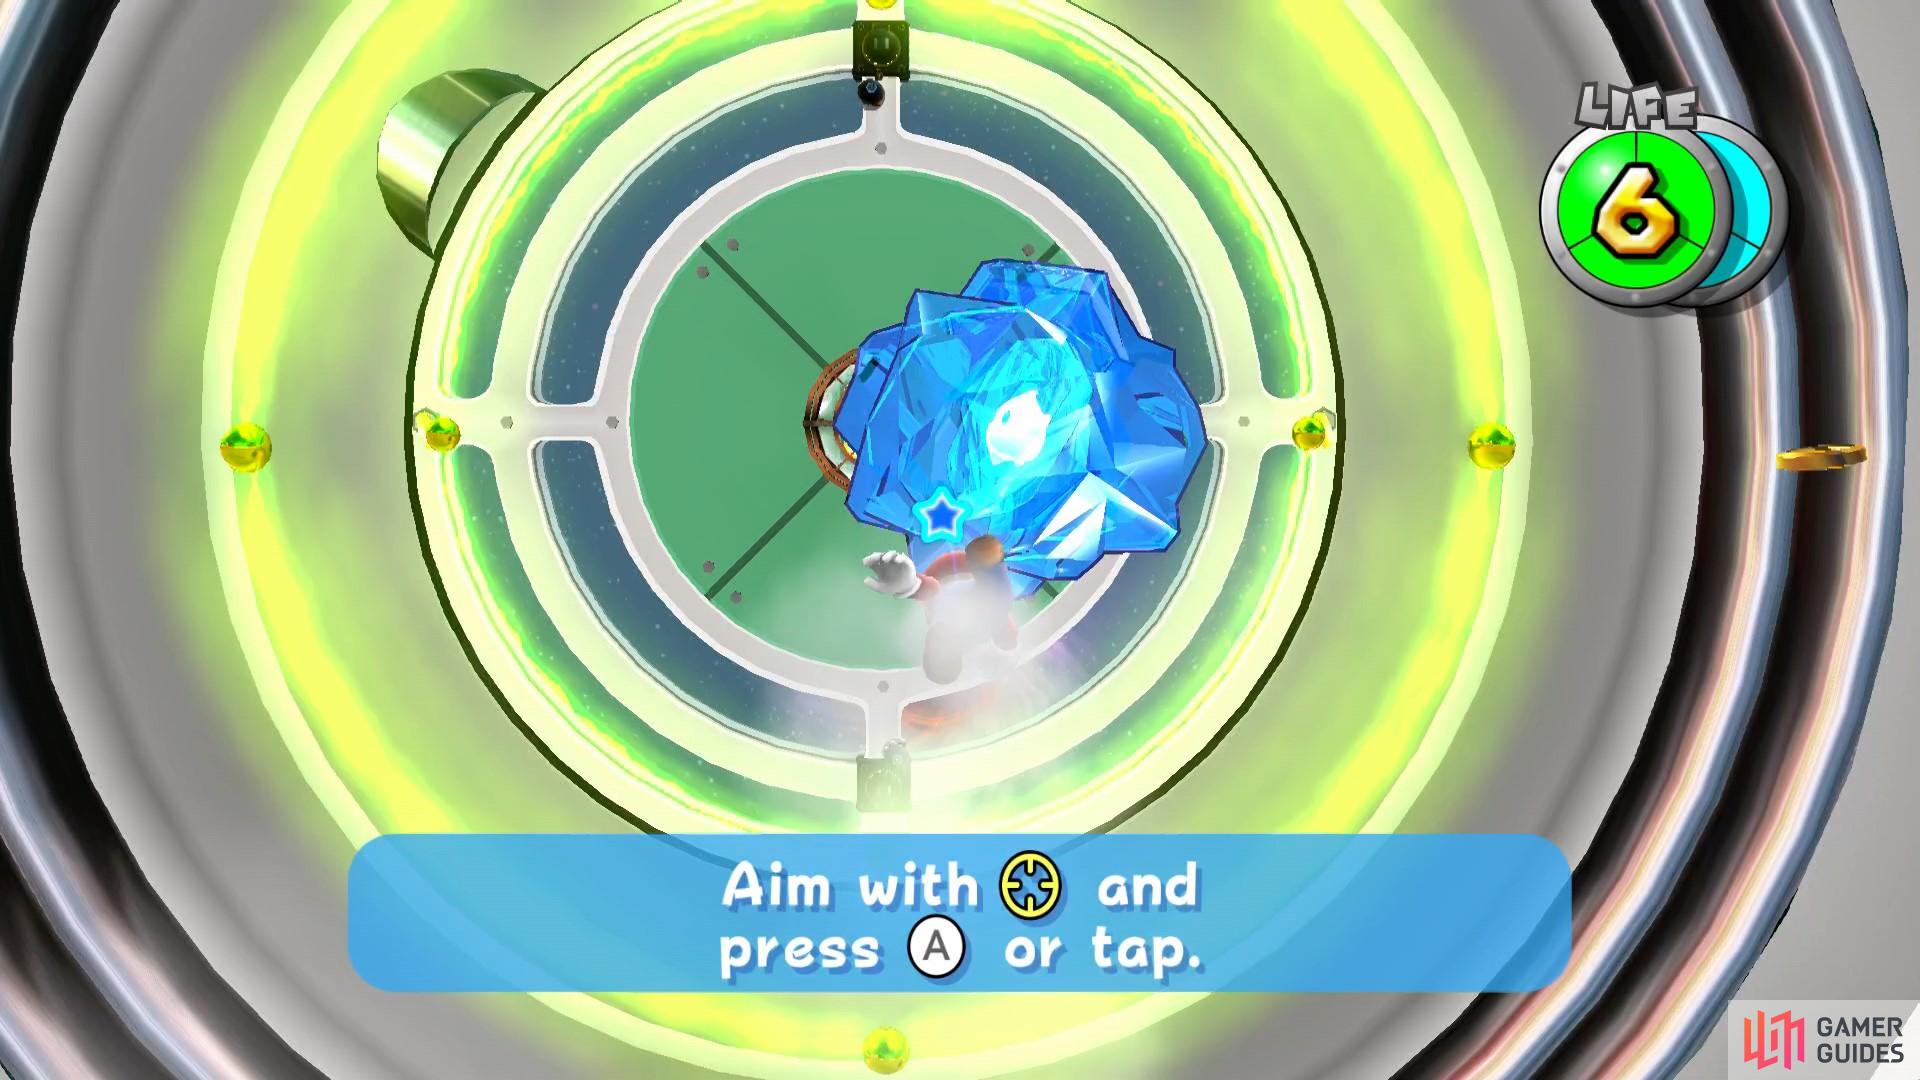 You’ll need to use the cannons at least twice to completely break the crystal and free the Luma.